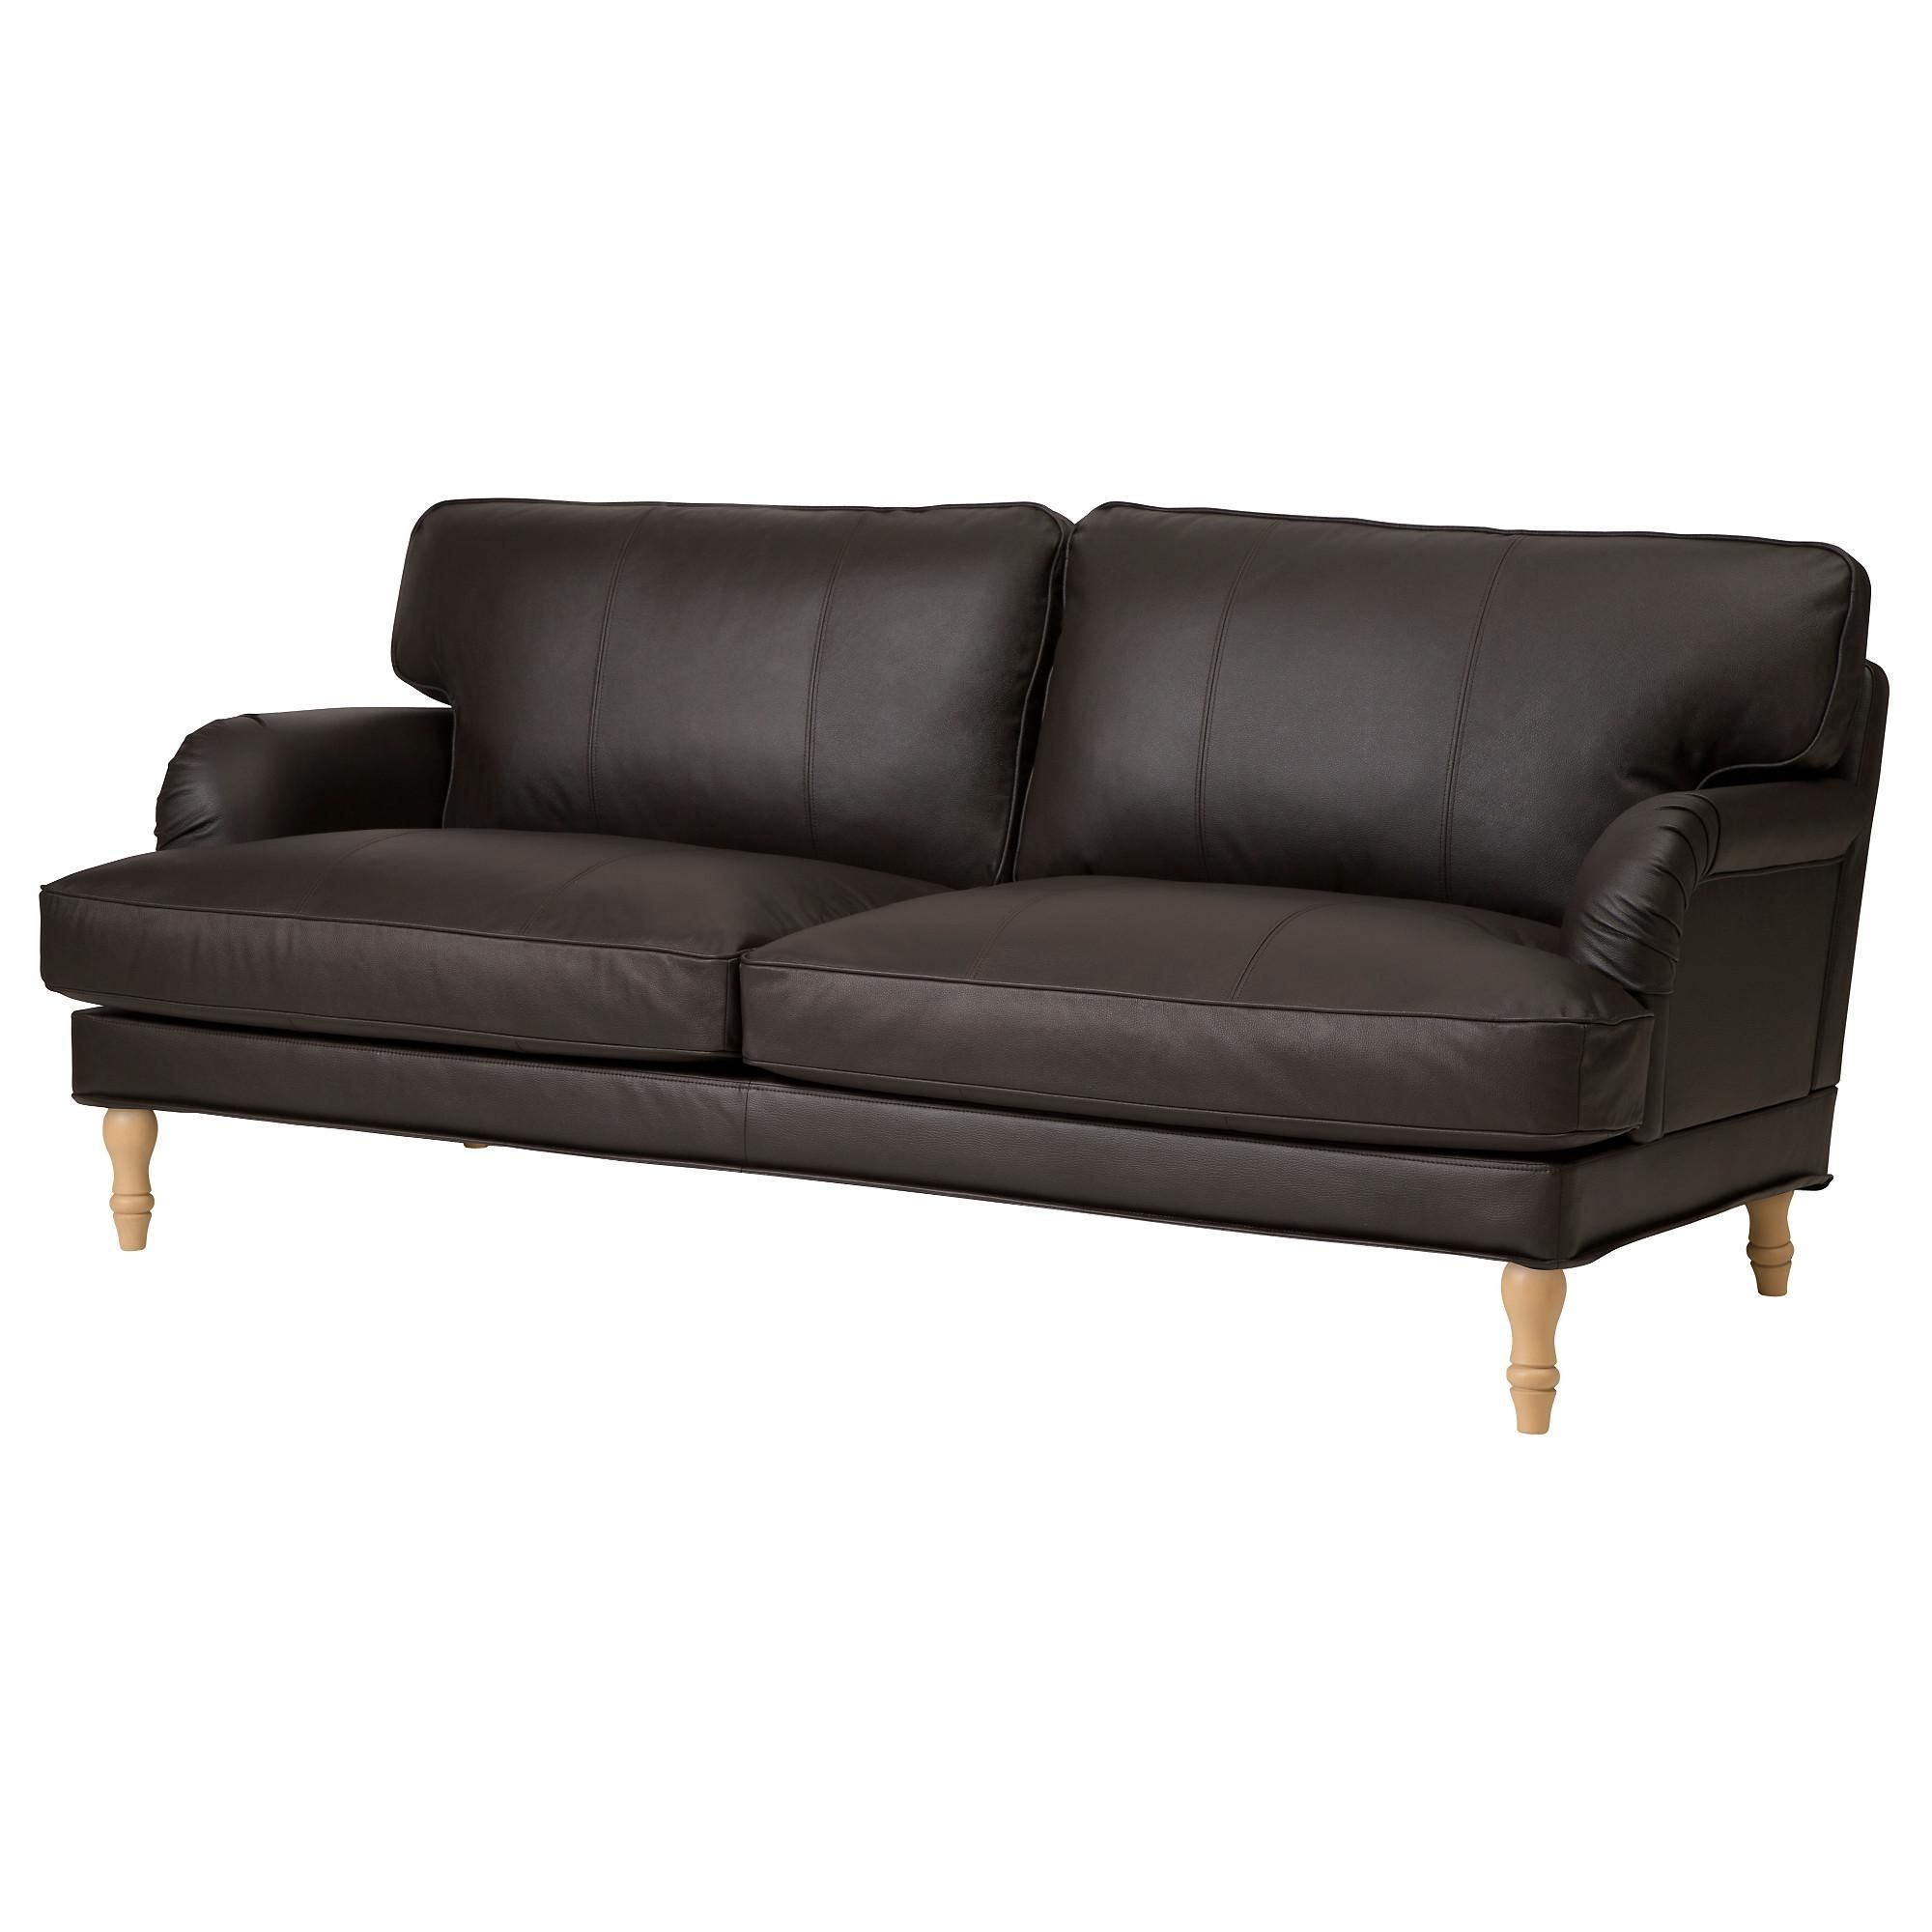 Leather & Faux Leather Couches, Chairs & Ottomans – Ikea With Regard To Leather Sofas (View 3 of 21)